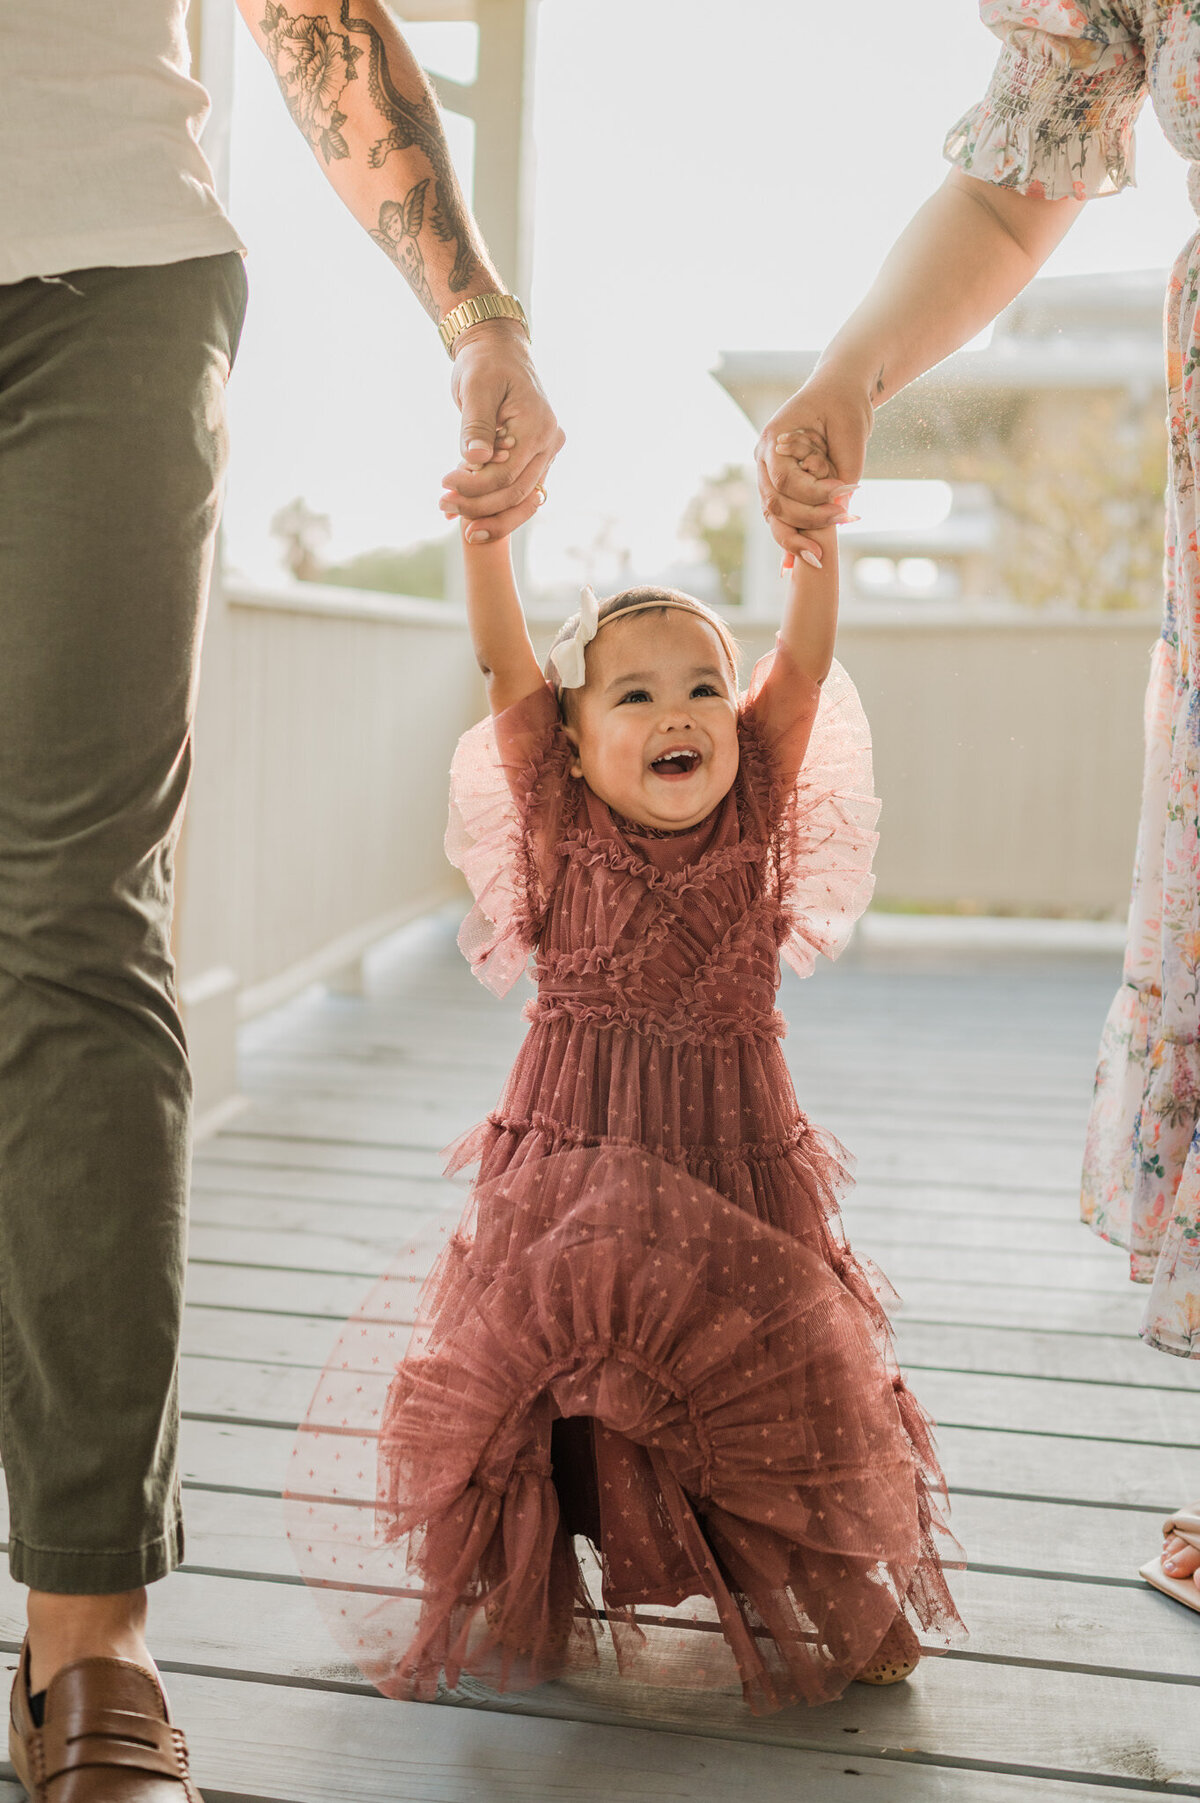 Little girl walks with her parents and laugh during a family photography session.